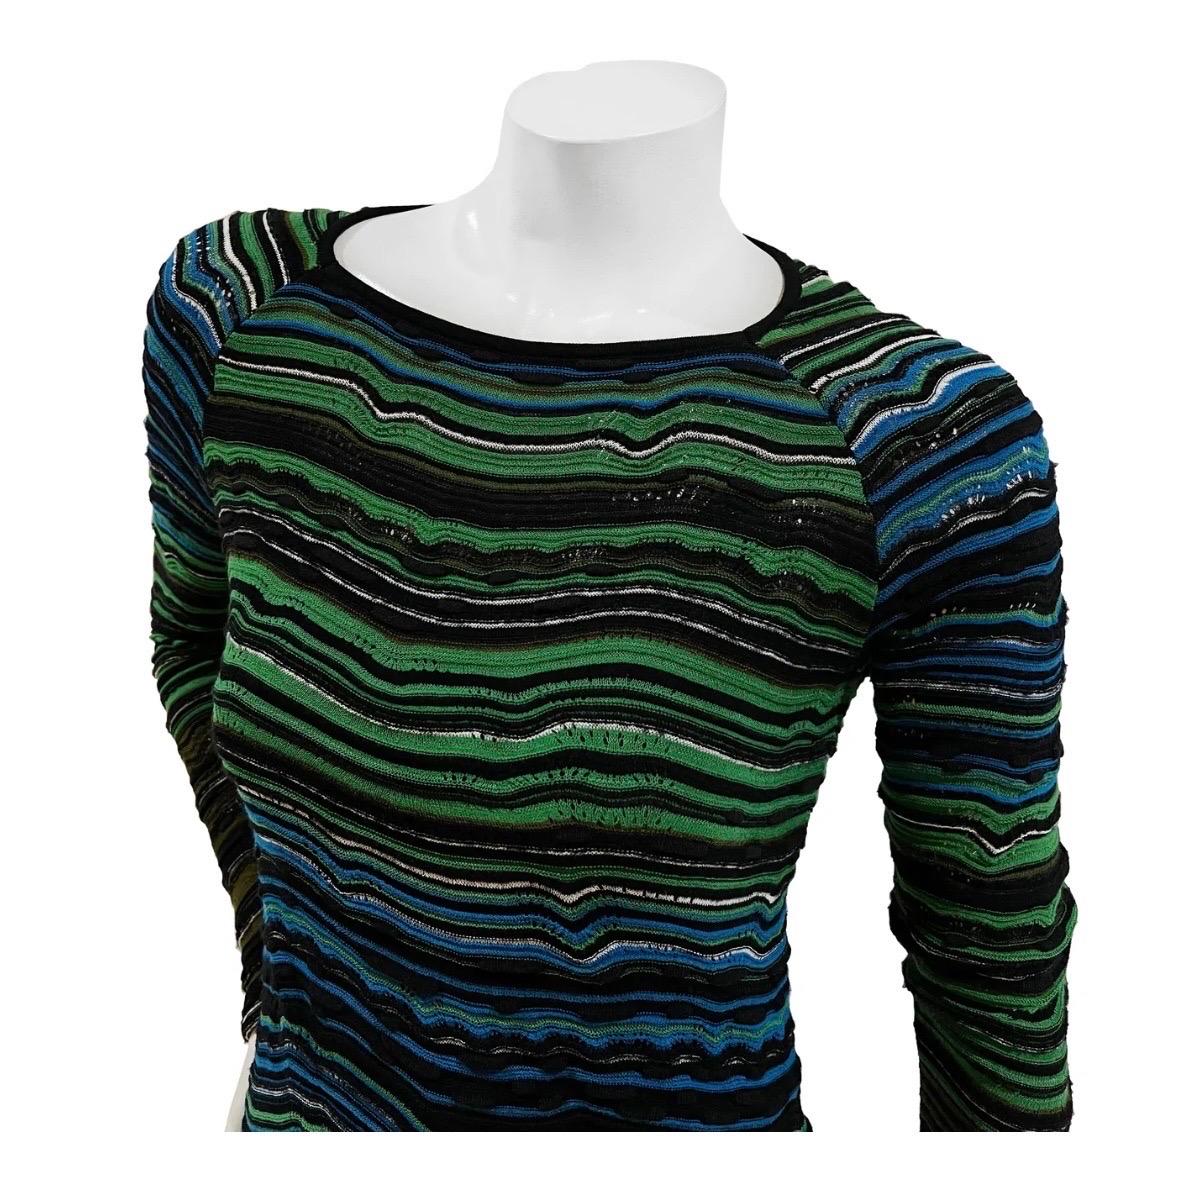 Long Sleeve Wave Knit Dress by Missoni 
Circa late 90s
Green/Blue/Black
Knit wave stripe detail throughout dress
Long sleeve
Fabric stretches
Dress has black spaghetti strap slip
Made in Romania 
Fabric Composition; 65% Viscose, 14% Synthetic, 10%